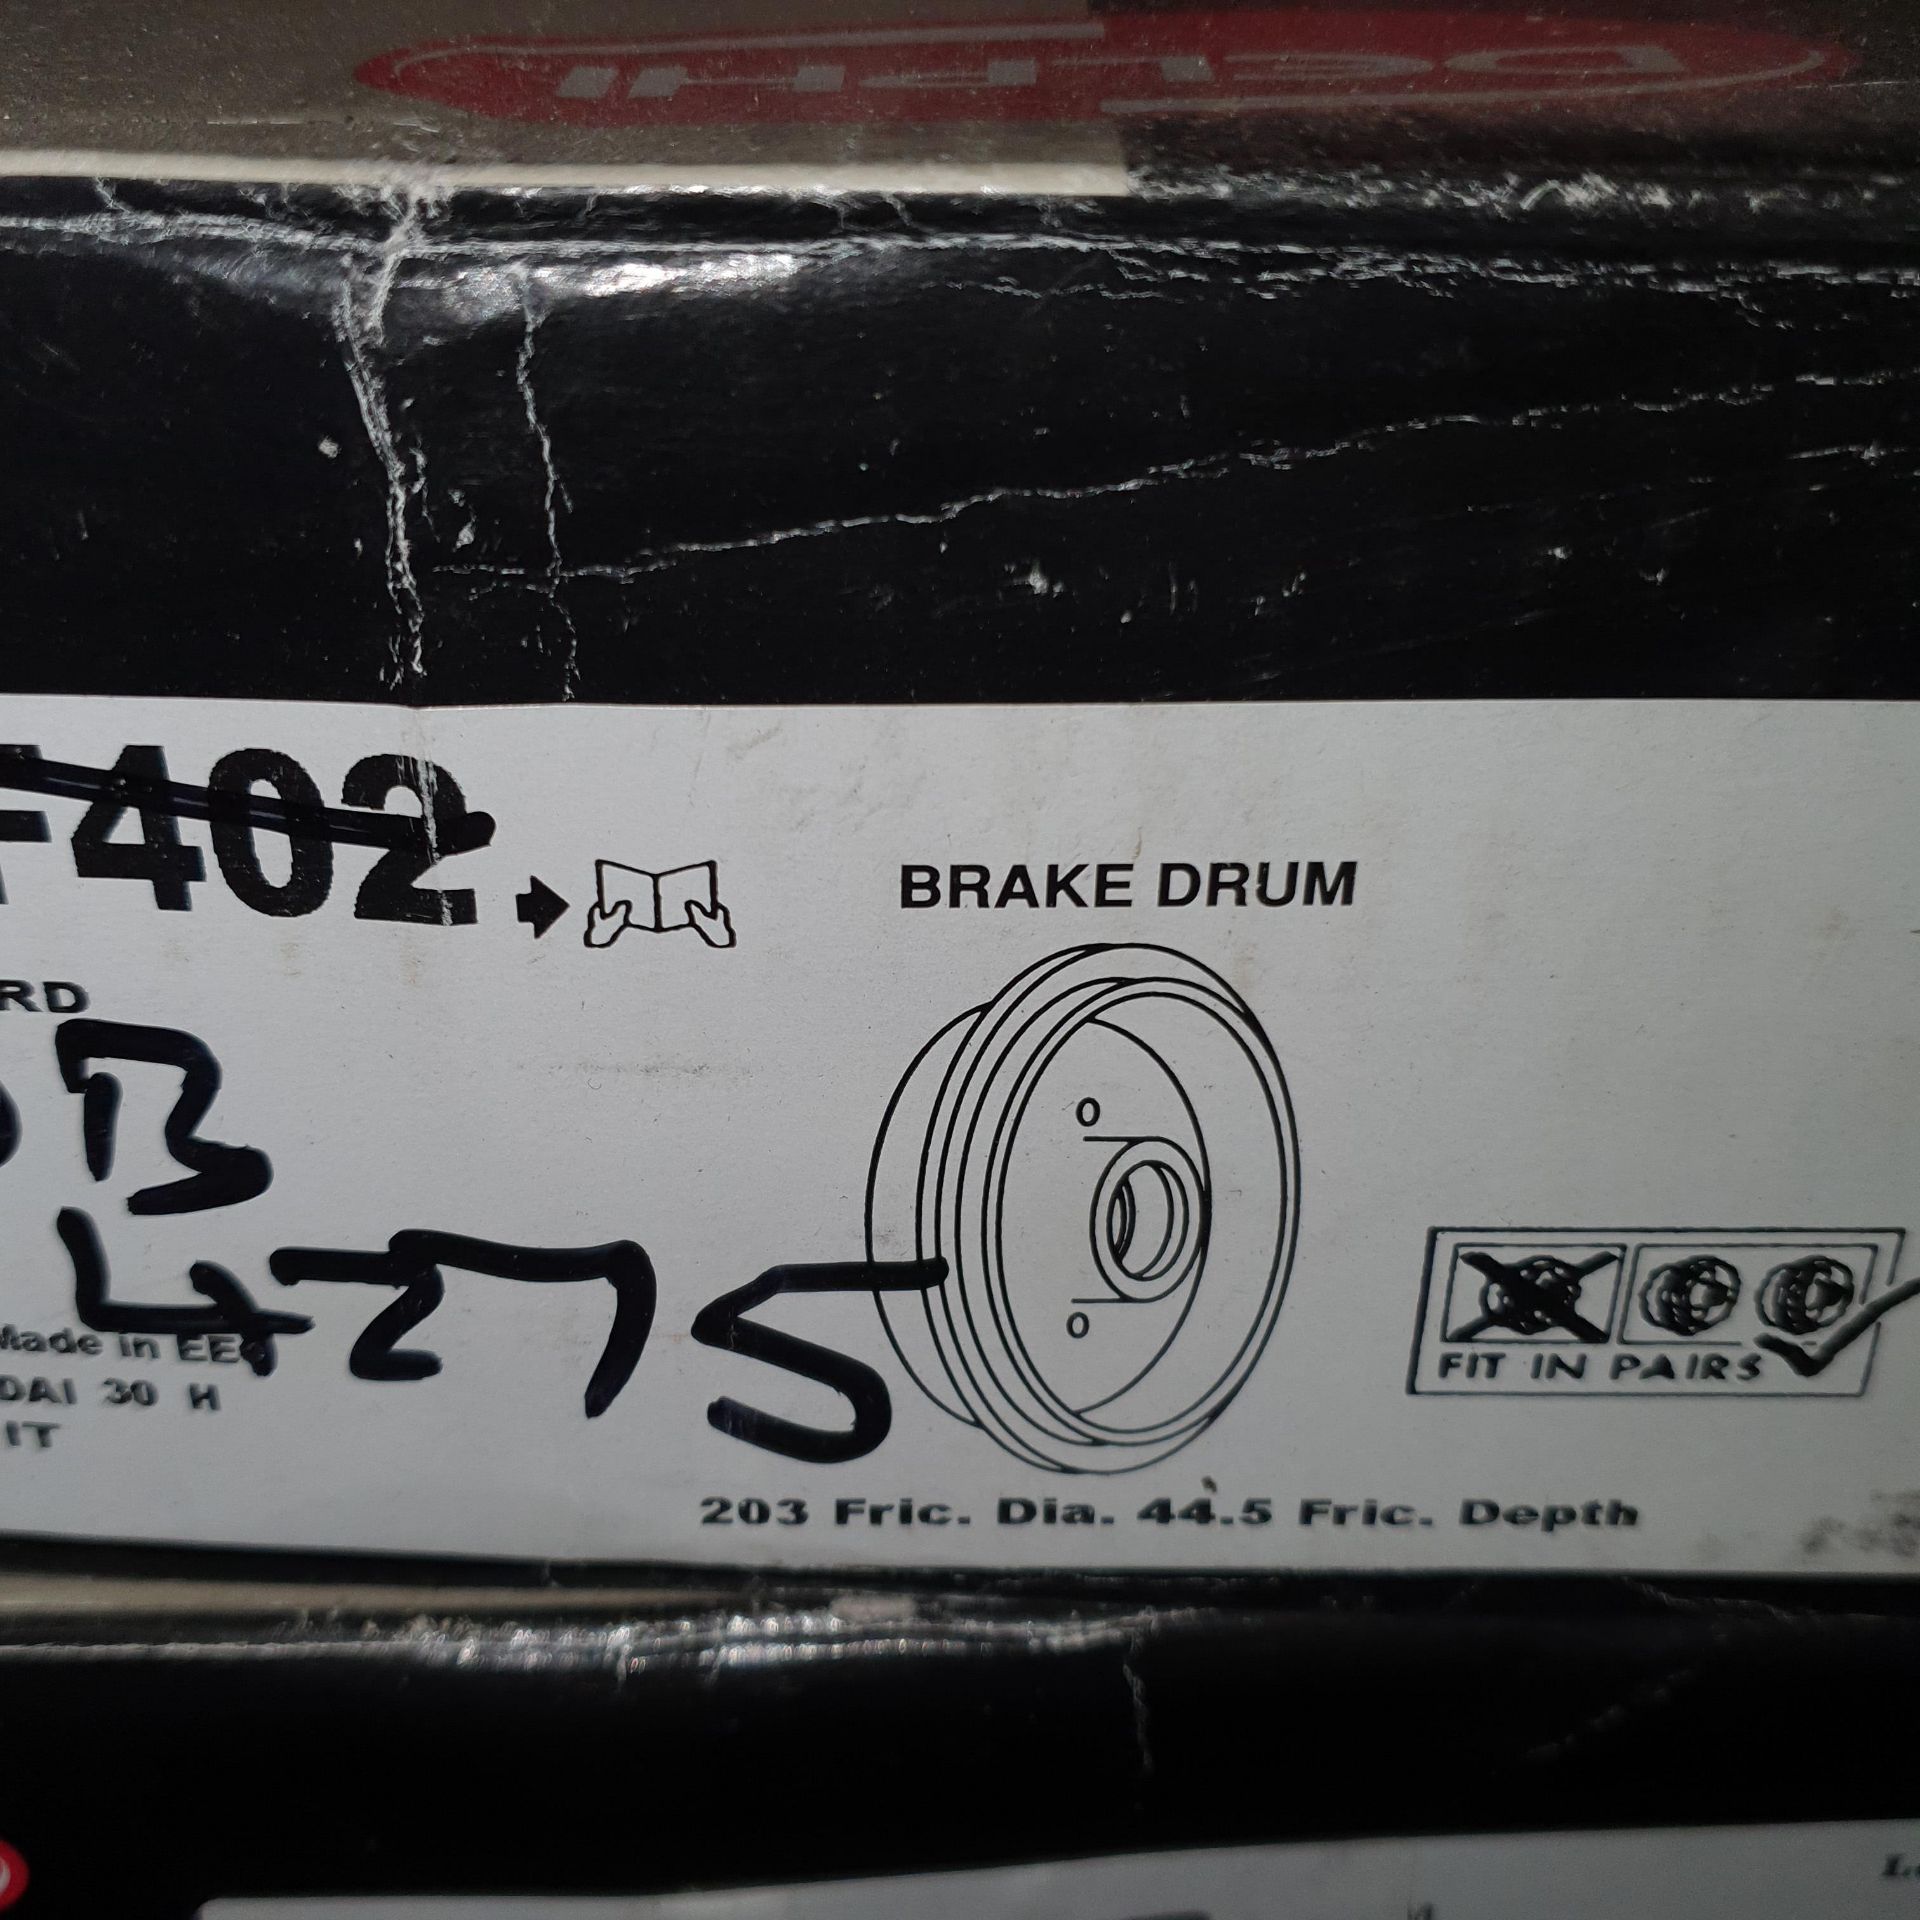 Delphi Brake Drums, as set out on one tier of rack - Image 2 of 4